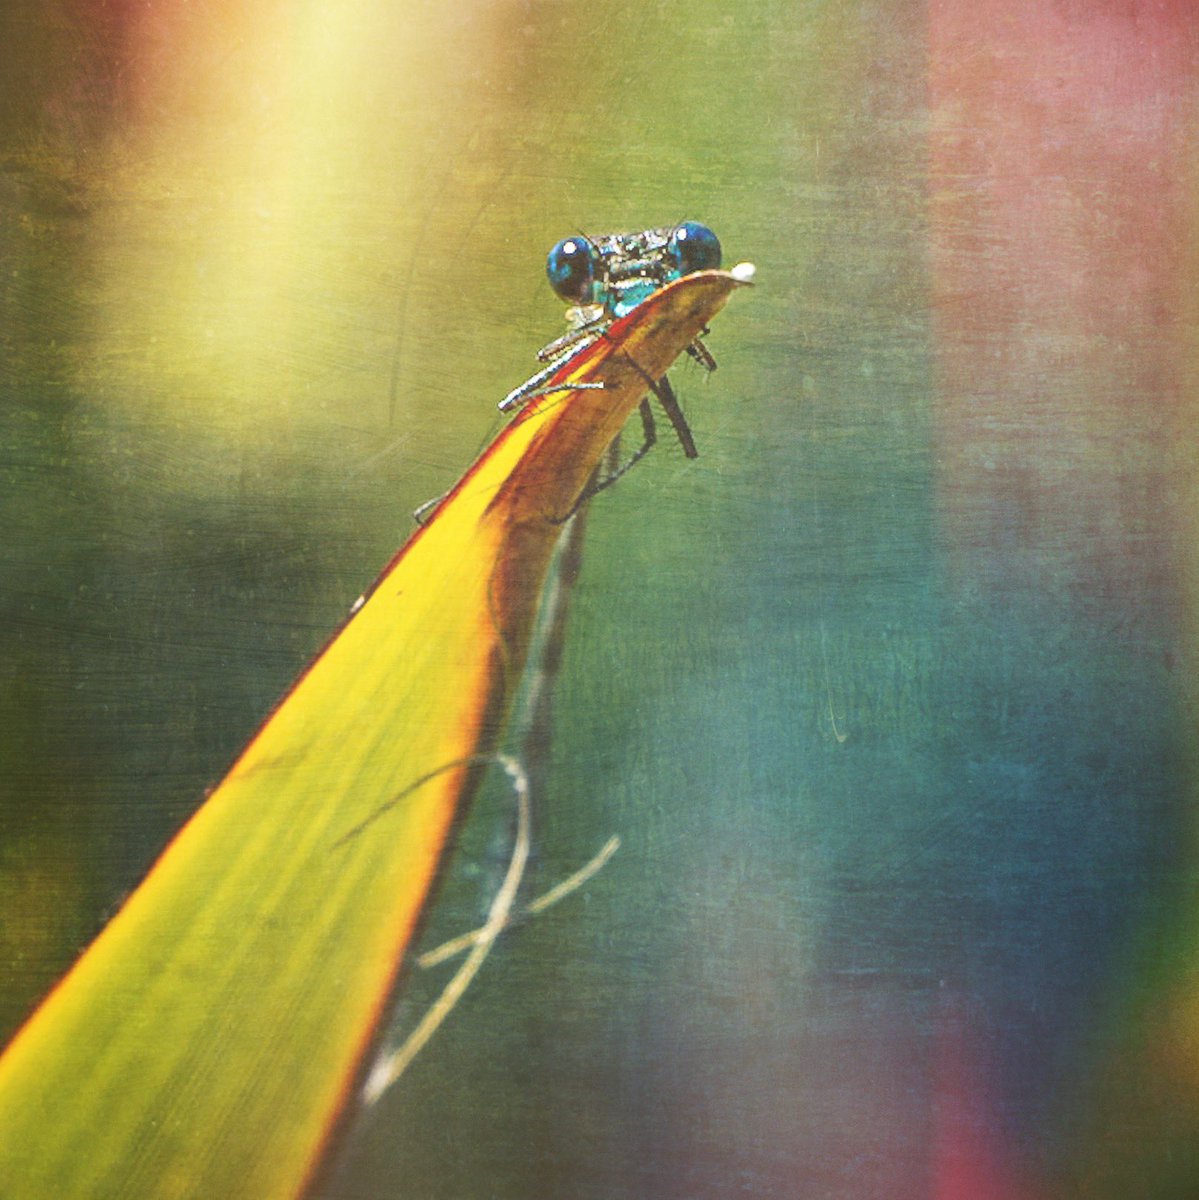 #dragonfly using #Mextures on the #iPad